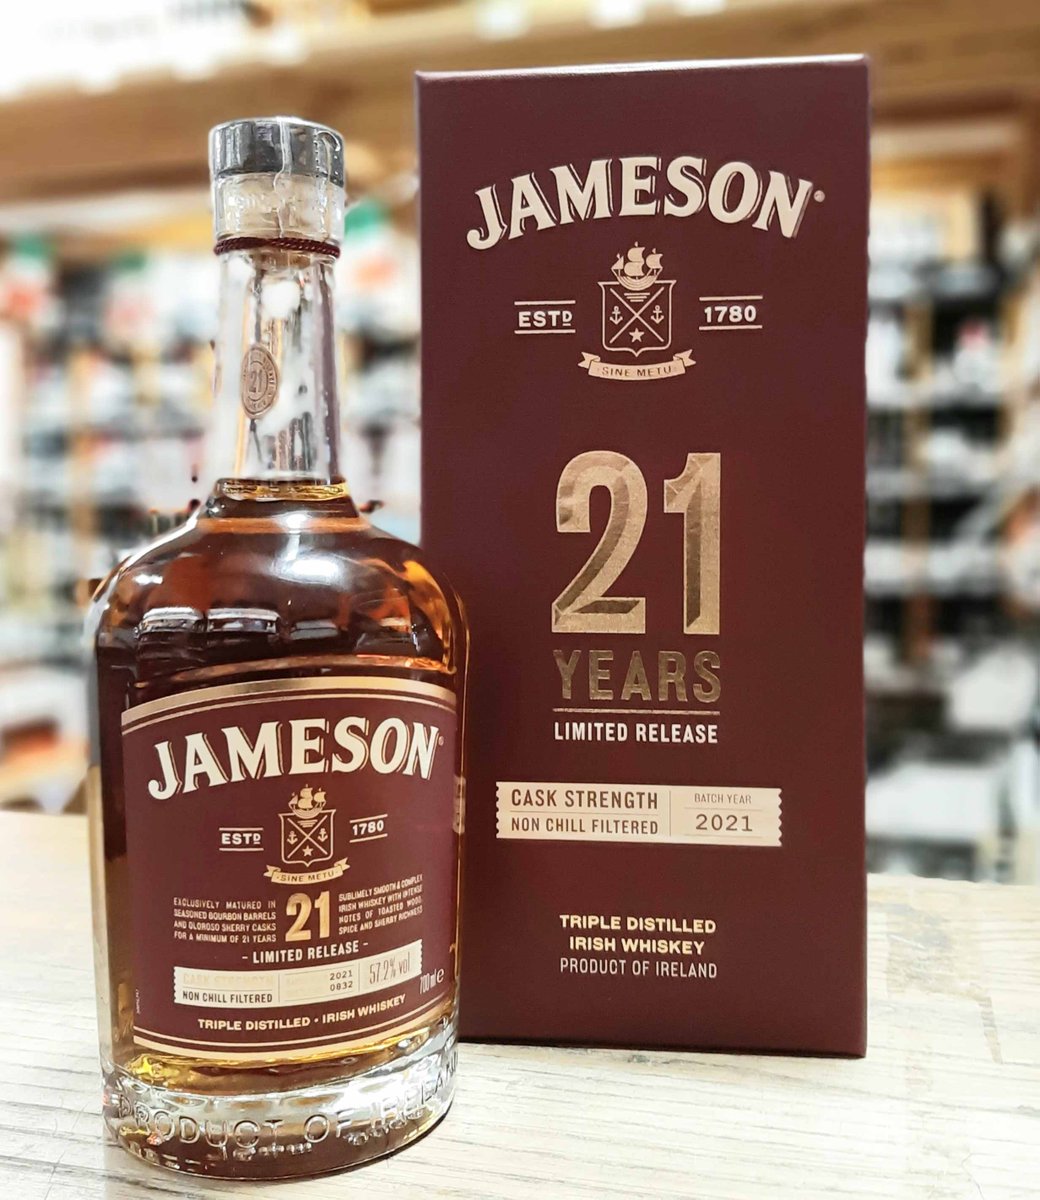 Get your hands on our last bottle of this stunning Irish whiskeys initially matured in a range of ex-bourbon & oloroso sherry seasoned casks! Currently available to order online from bit.ly/Jameson21 #jameson21yearold #jamesonirishwhieksy #collectableirishwhiskey